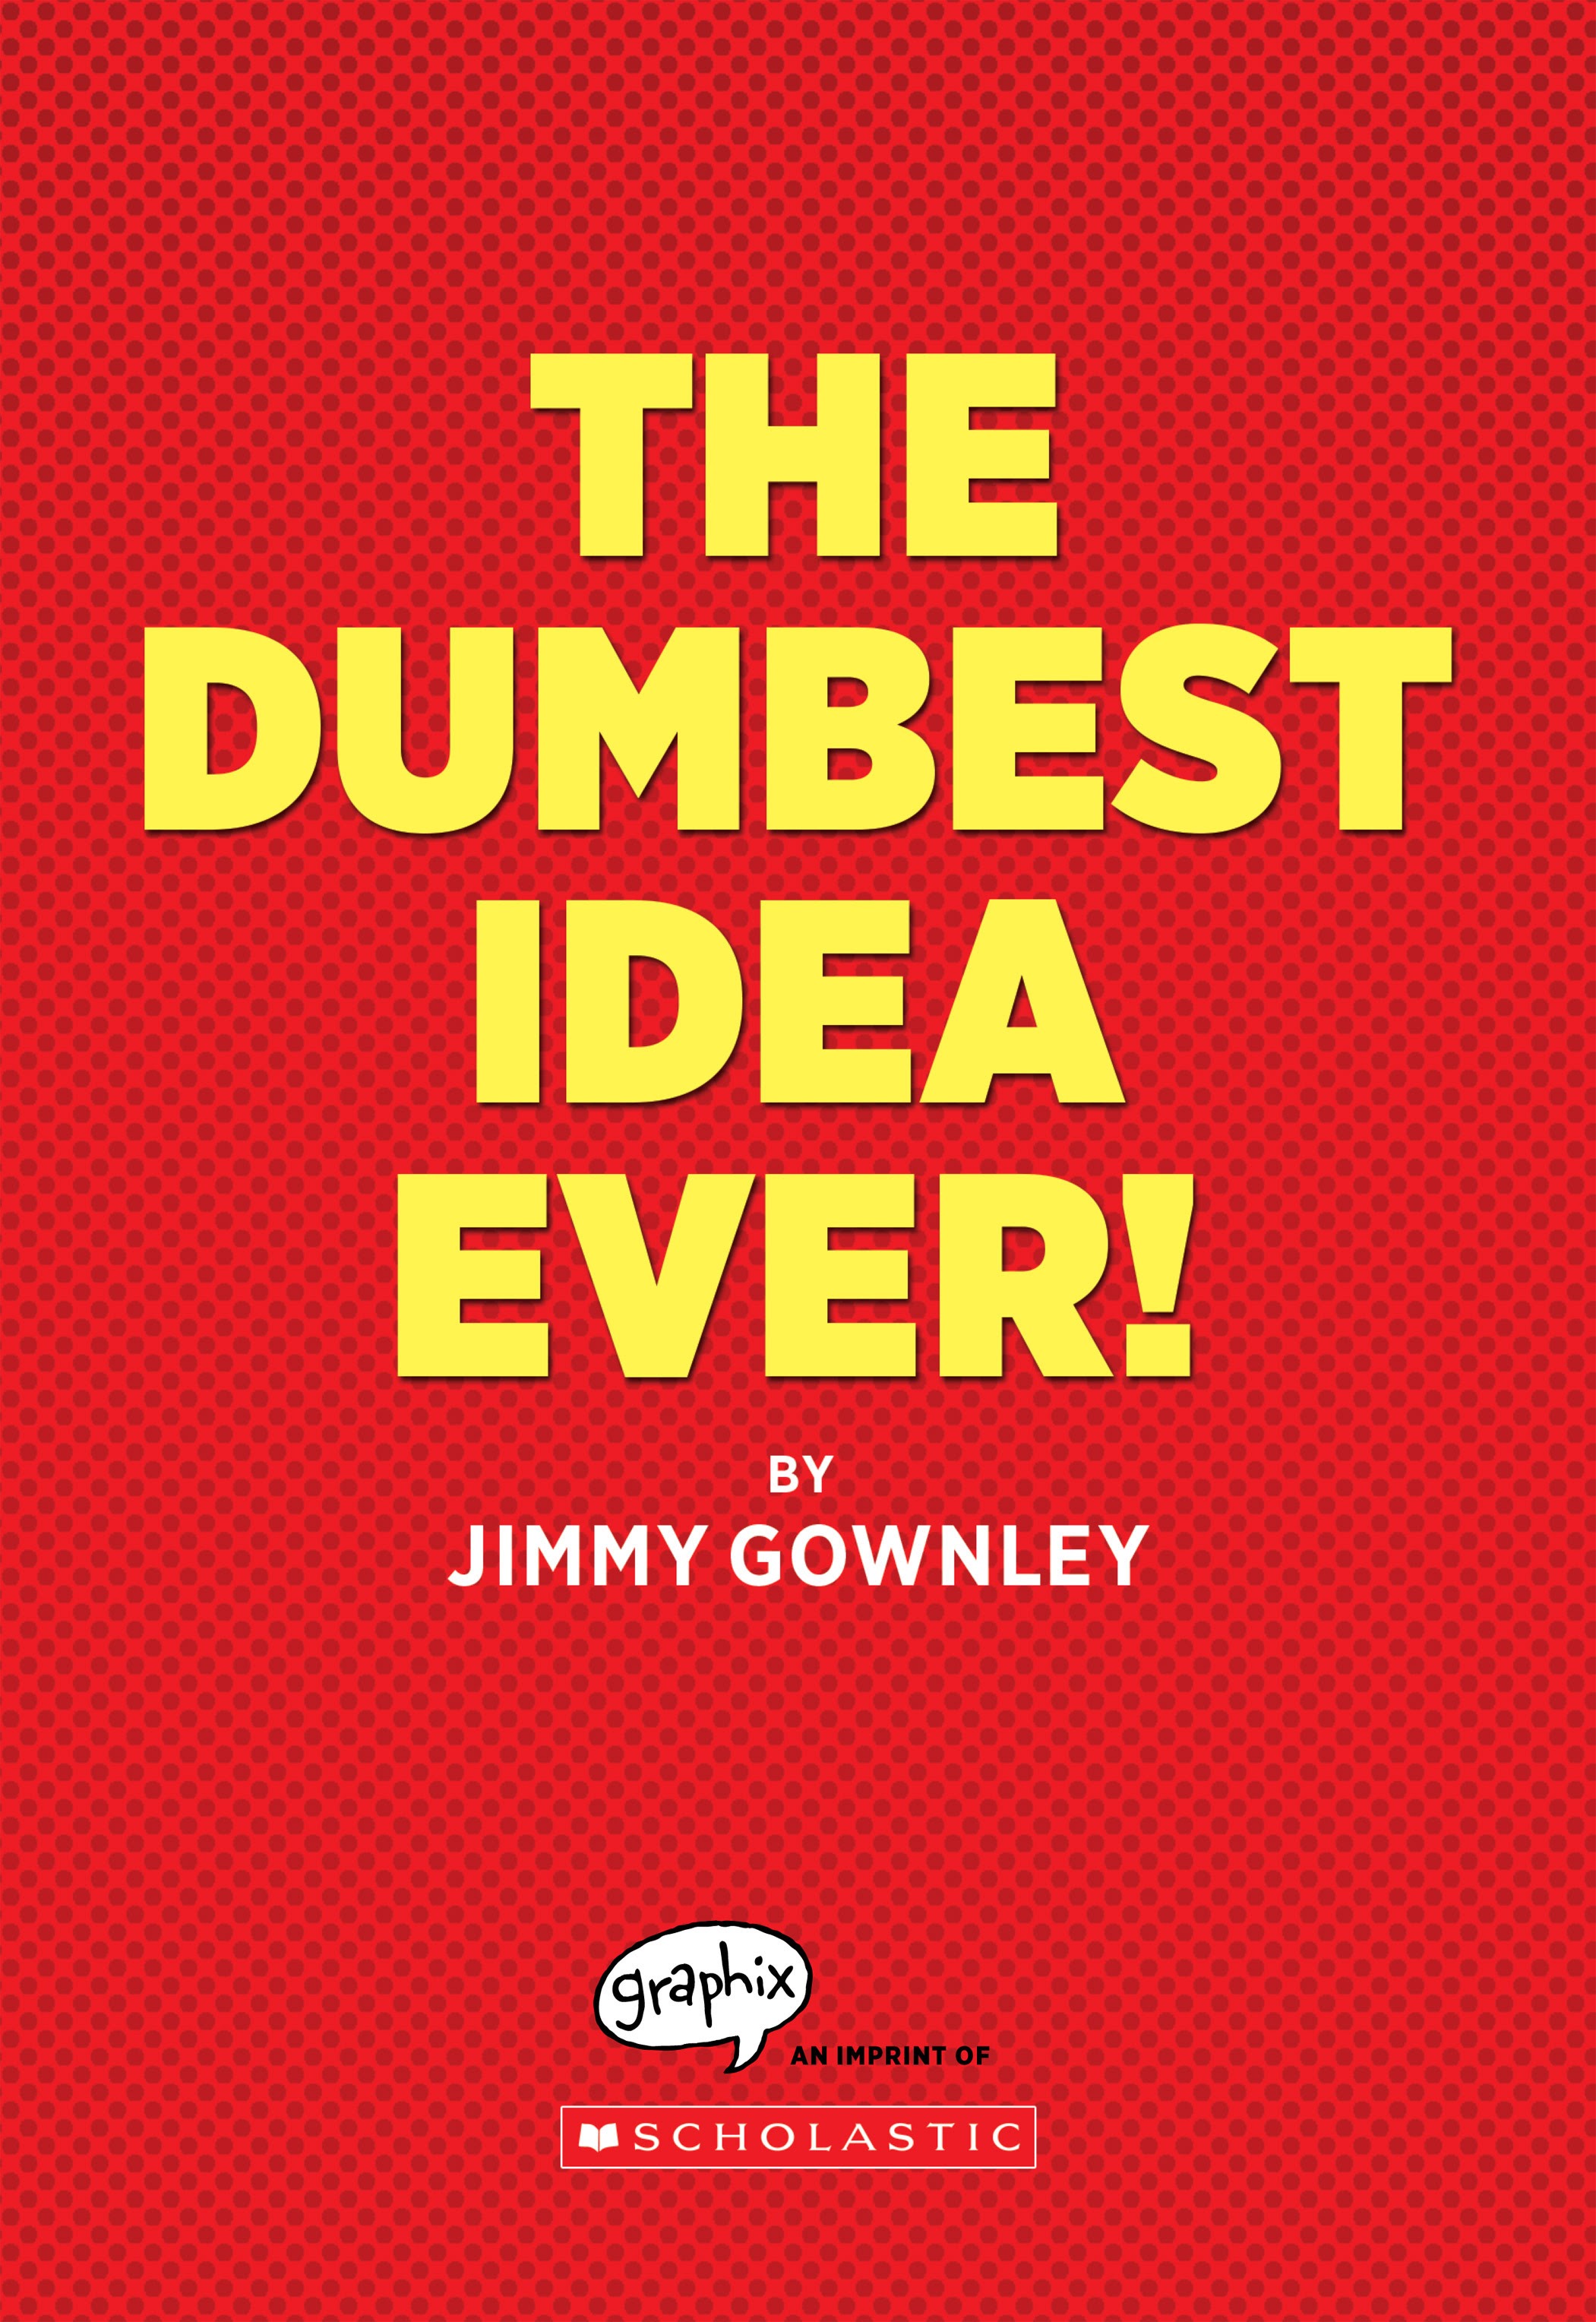 Read online The Dumbest Idea Ever! comic -  Issue # TPB (Part 1) - 2